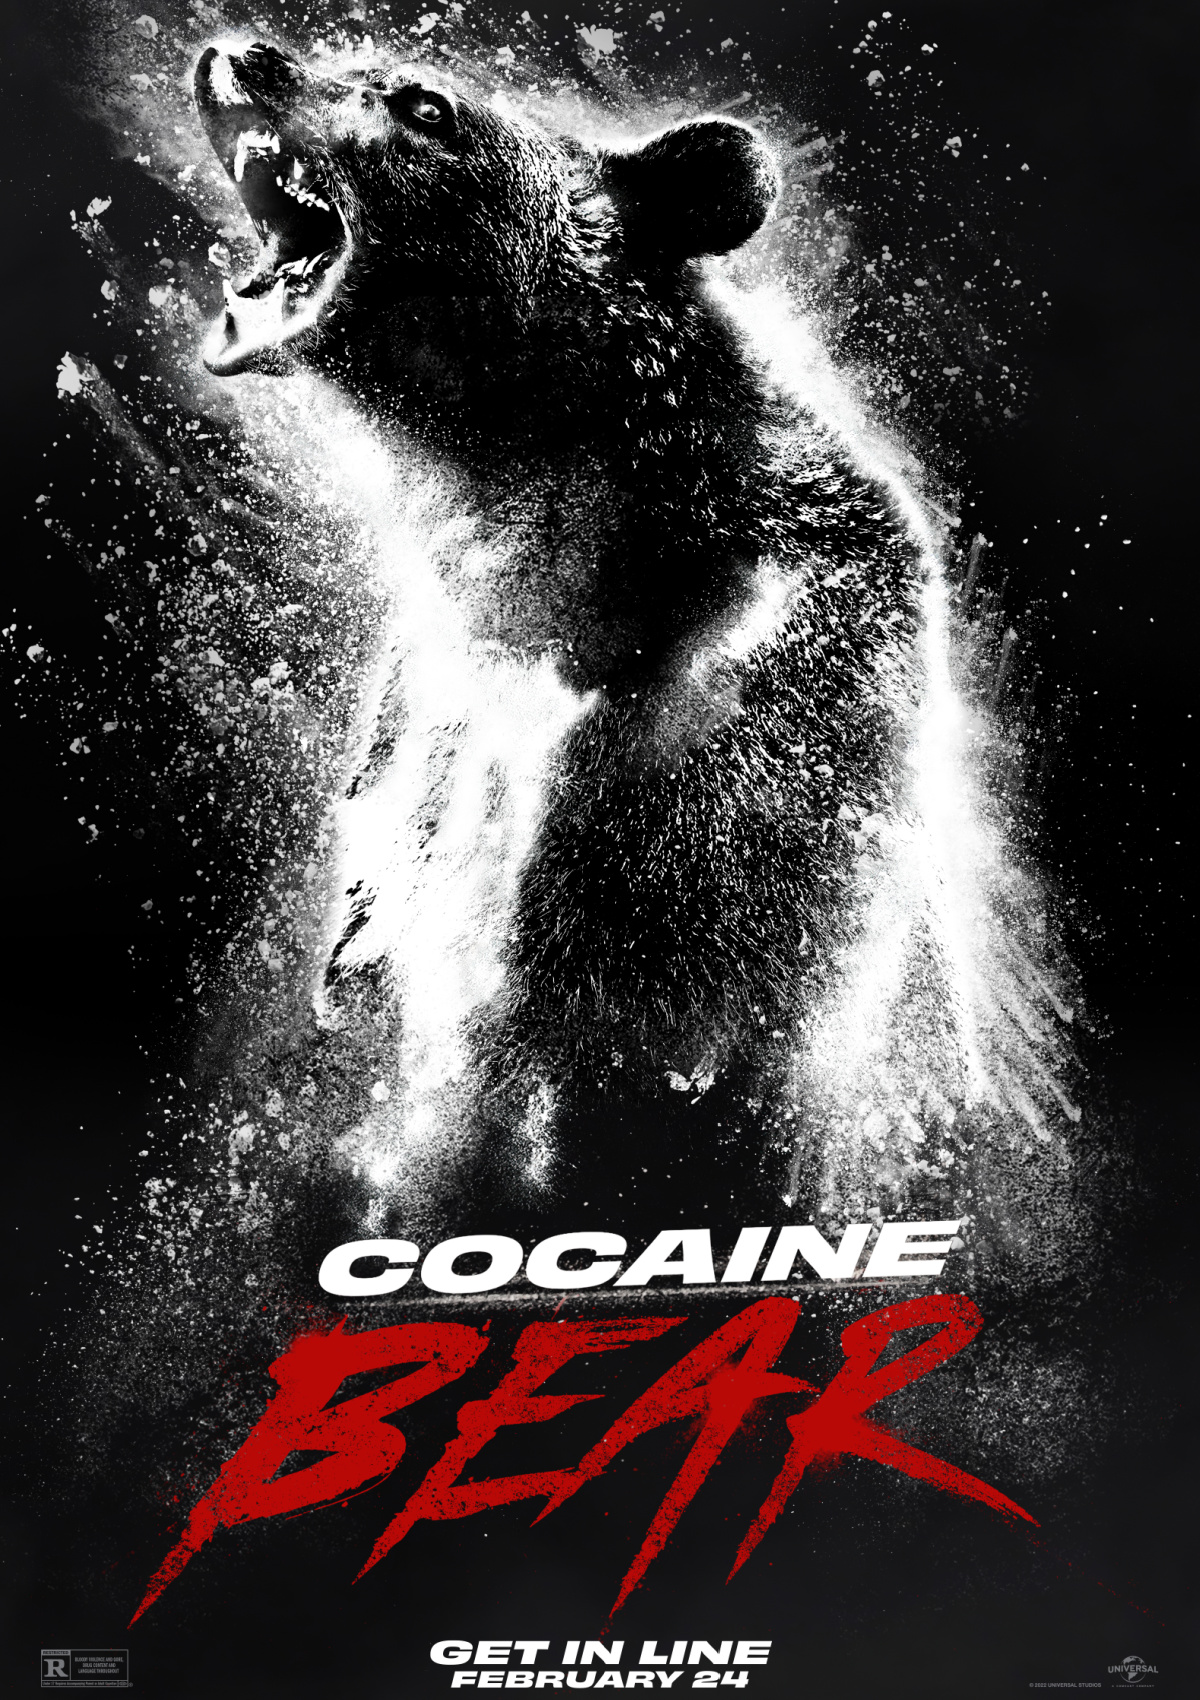 ‘Cocaine Bear’ will be open in theaters on February 24th.